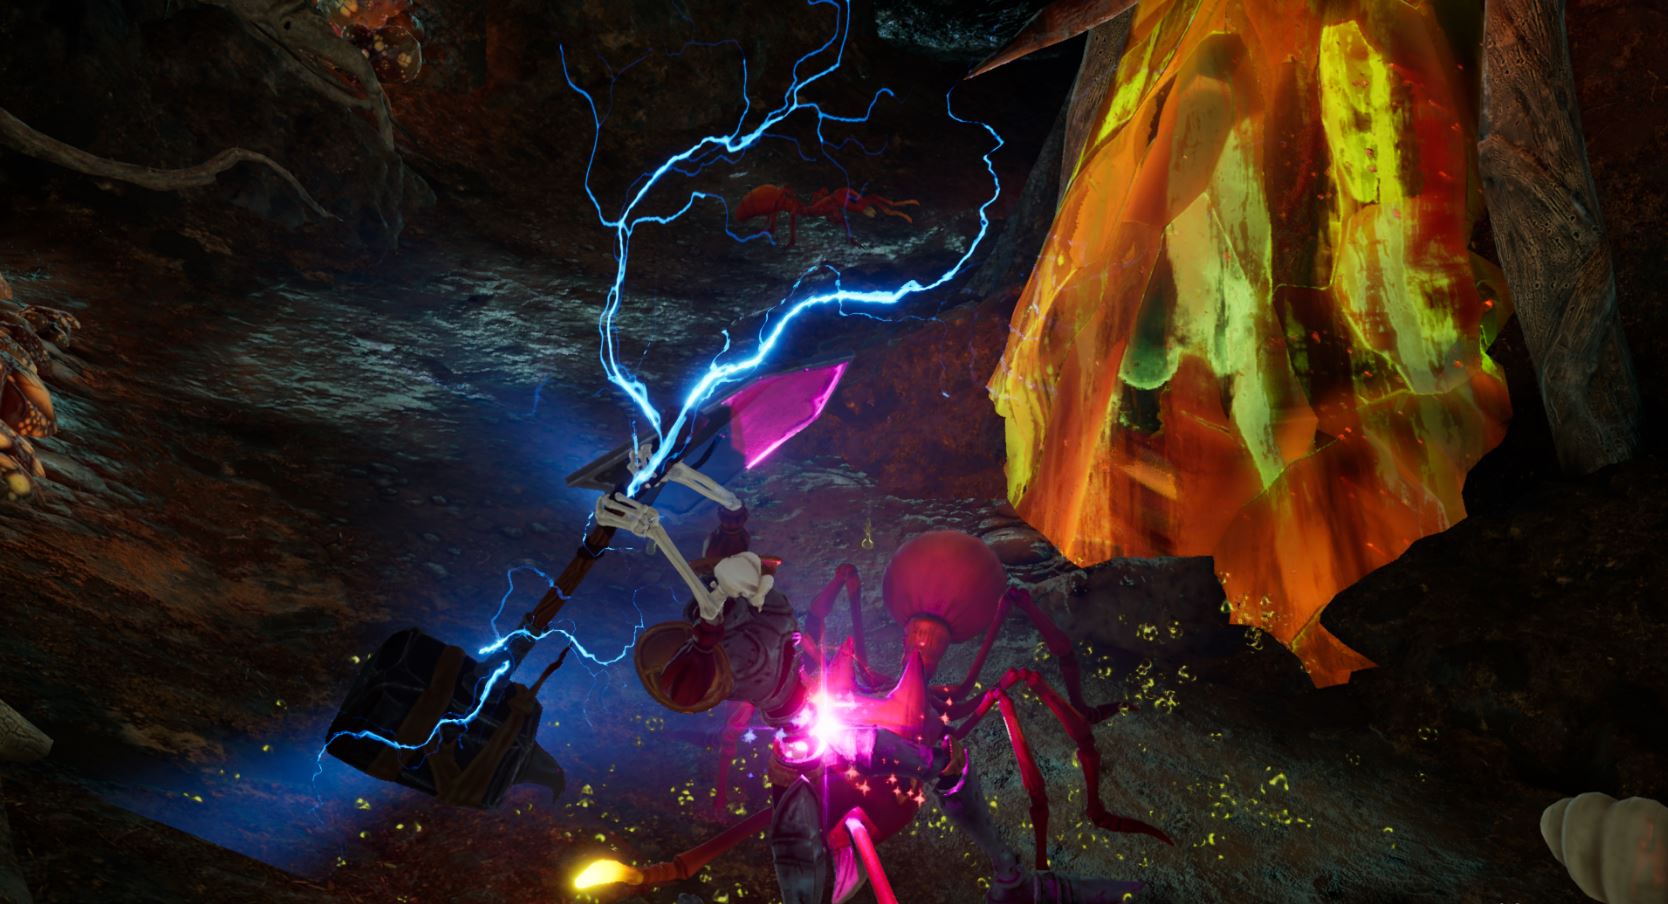 Medievil Gameplay Released From Game Xp 2019 Playstation Universe Images, Photos, Reviews